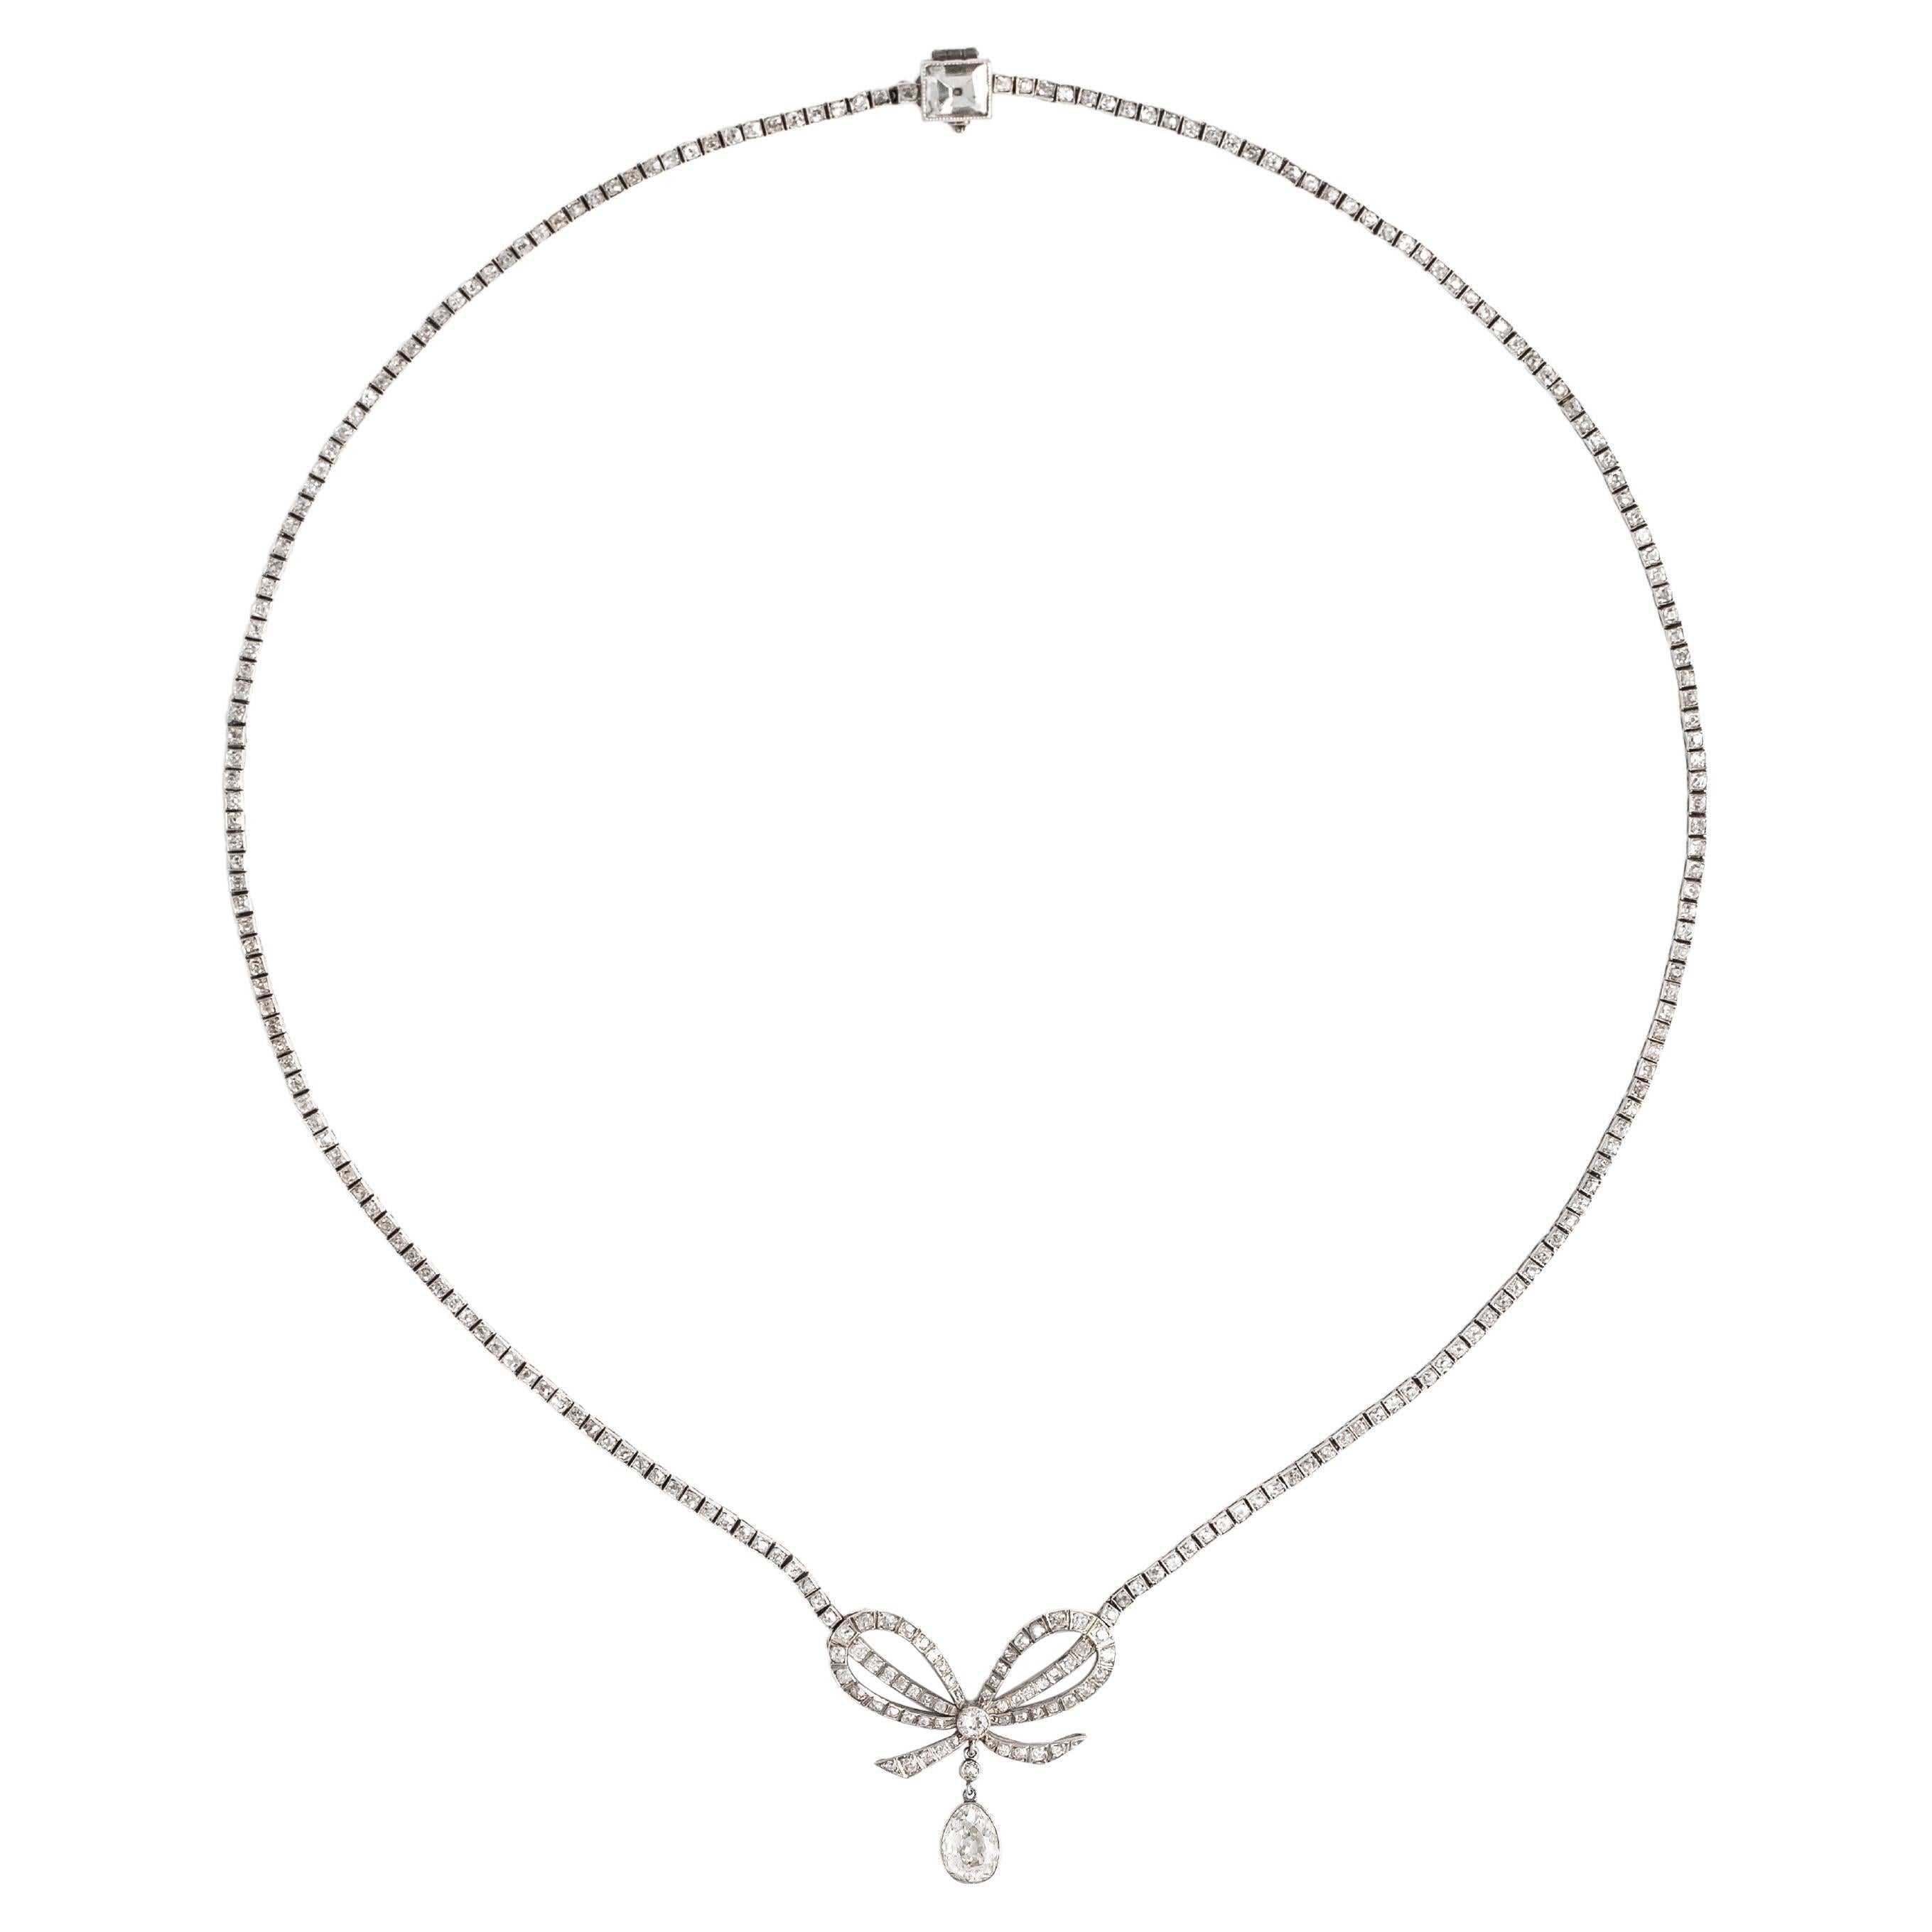 Belle Epoque Diamond Platinum Bow Pendant Necklace.
In our opinion we estimate the old mine cut pear shape diamond weights around 1.30/1.60 carat,
The square cut diamond on the clasp weights around 0.80/1.10 carat. The remaining diamonds weight